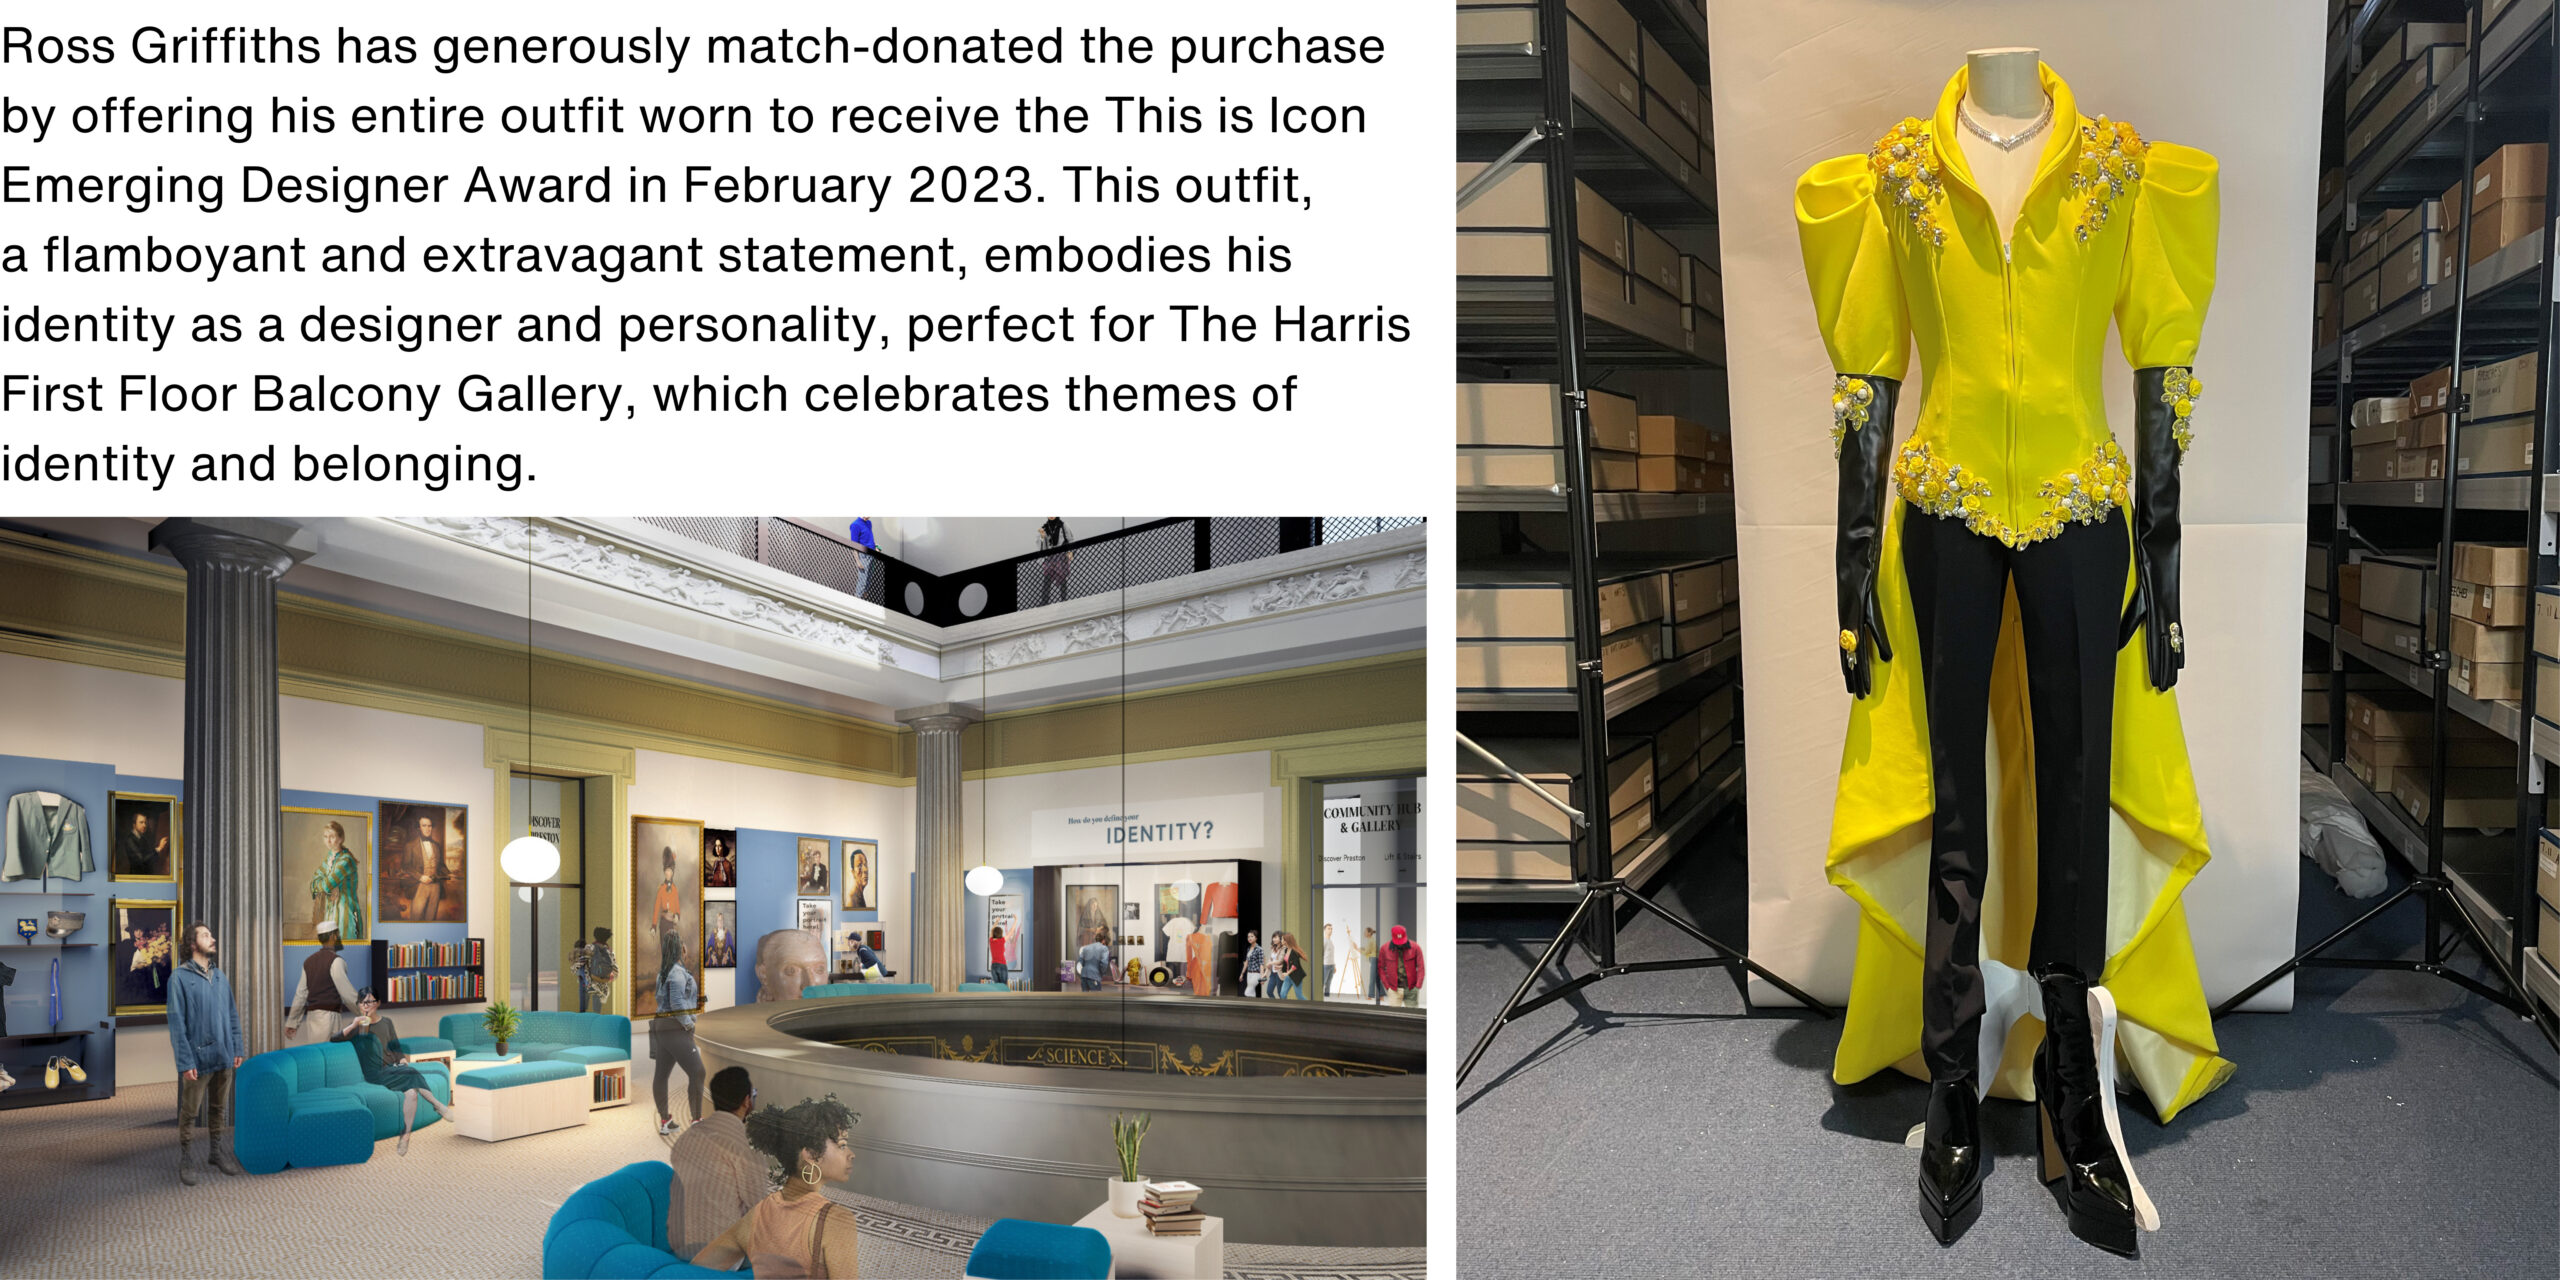 A yellow suit and a rendered image of the first floor balcony with the accompanying text: Ross Griffiths has generously match-donated the purchase by offering his entire outfit worn to receive the This is Icon Emerging Designer Award in February 2023. This outfit, a flamboyant and extravagant statement, embodies his identity as a designer and personality, perfect for The Harris First Floor Balcony Gallery, which celebrates themes of identity and belonging.